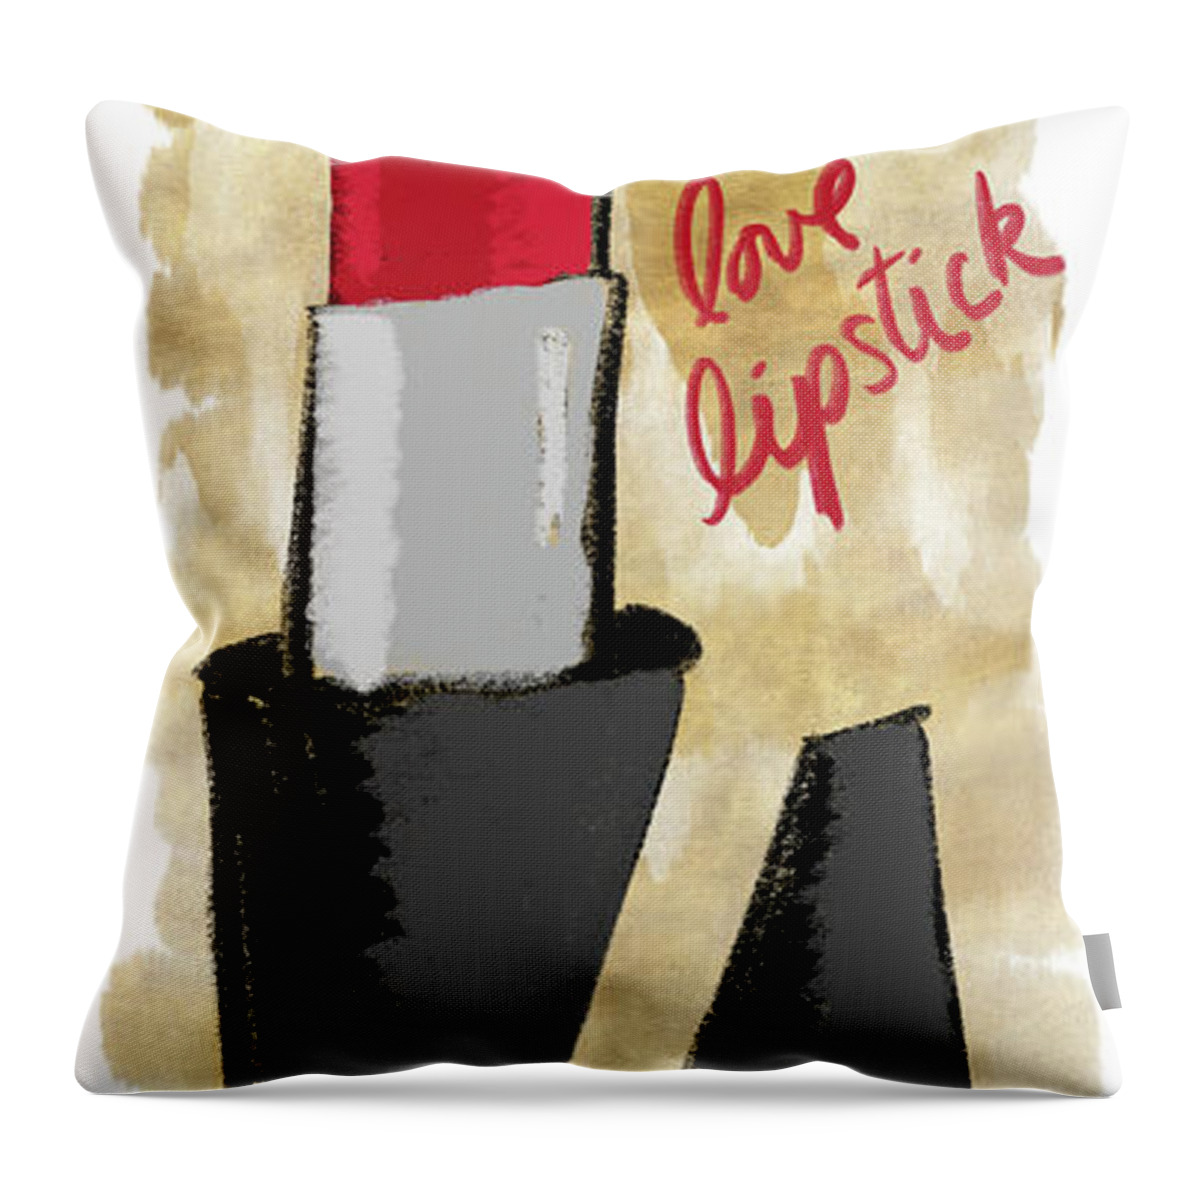 Red Throw Pillow featuring the mixed media Love Lipstick Panel by Sd Graphics Studio